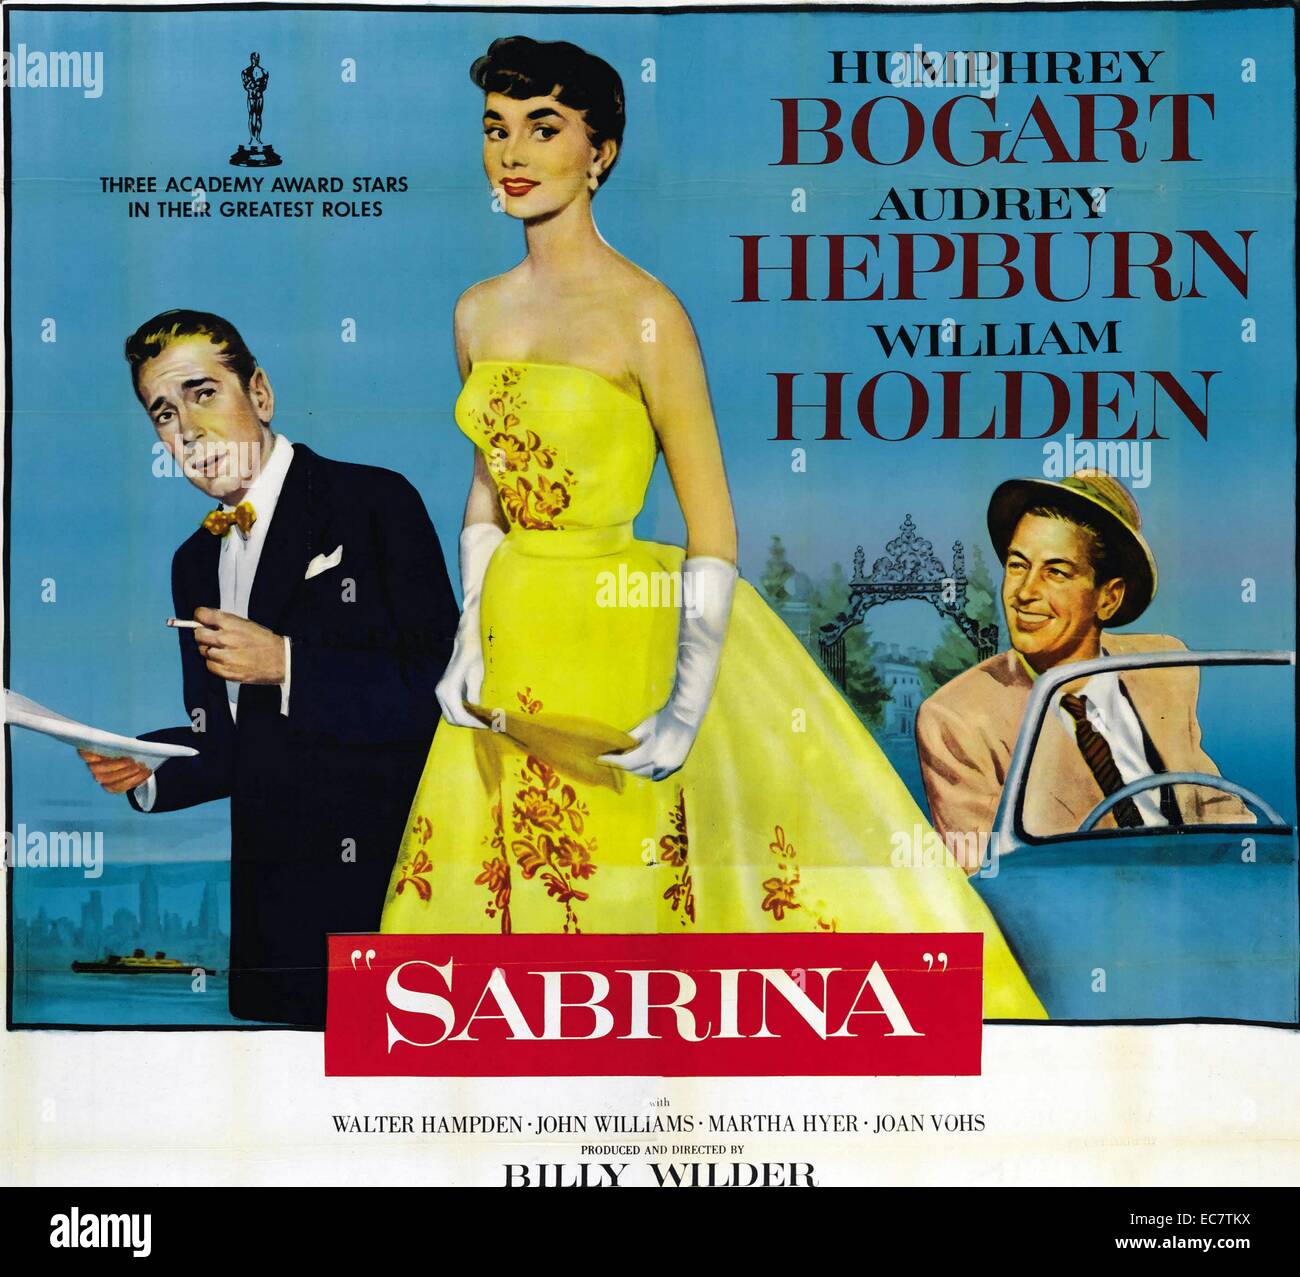 Sabrina (Sabrina Fair in the United Kingdom) is a 1954 American romantic comedy film directed by Billy Wilder and adapted from Samuel A. Taylor's play Sabrina Fair. It stars Humphrey Bogart, Audrey Hepburn, and William Holden. This was Wilder's last film released by Paramount Pictures, ending a 12-year business relationship with Wilder and the company. Stock Photo